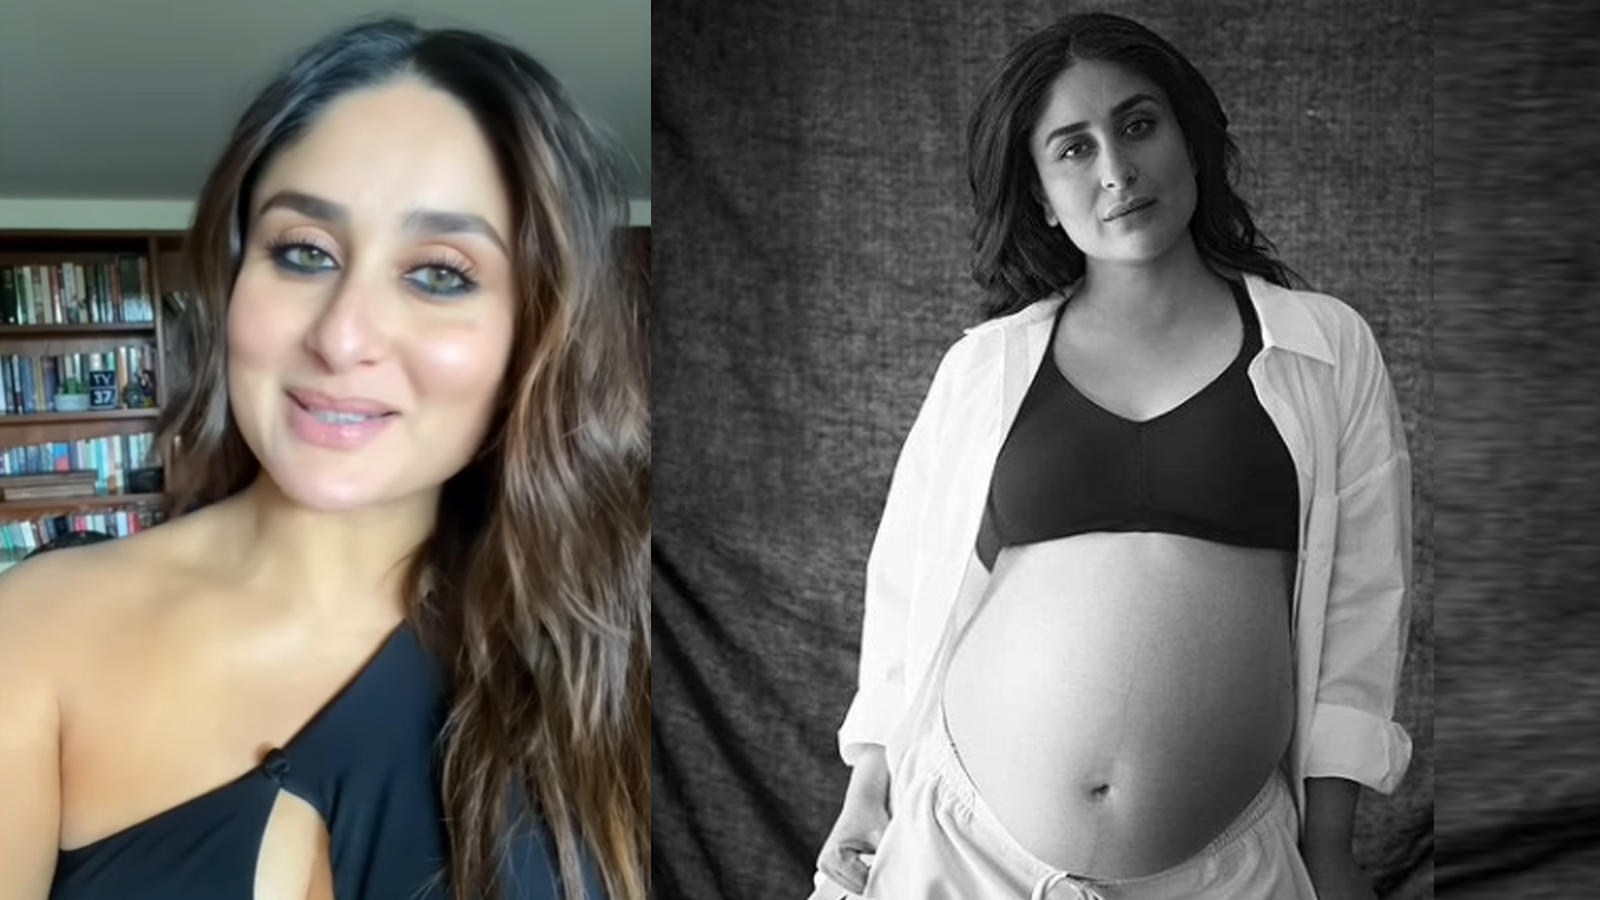 Mum And Son Sleeping Bengali Sex Video - Kareena Kapoor Khan opens up on sex during pregnancy, says 'People are not  used to seeing mainstream actors talking about these things' | Hindi Movie  News - Bollywood - Times of India